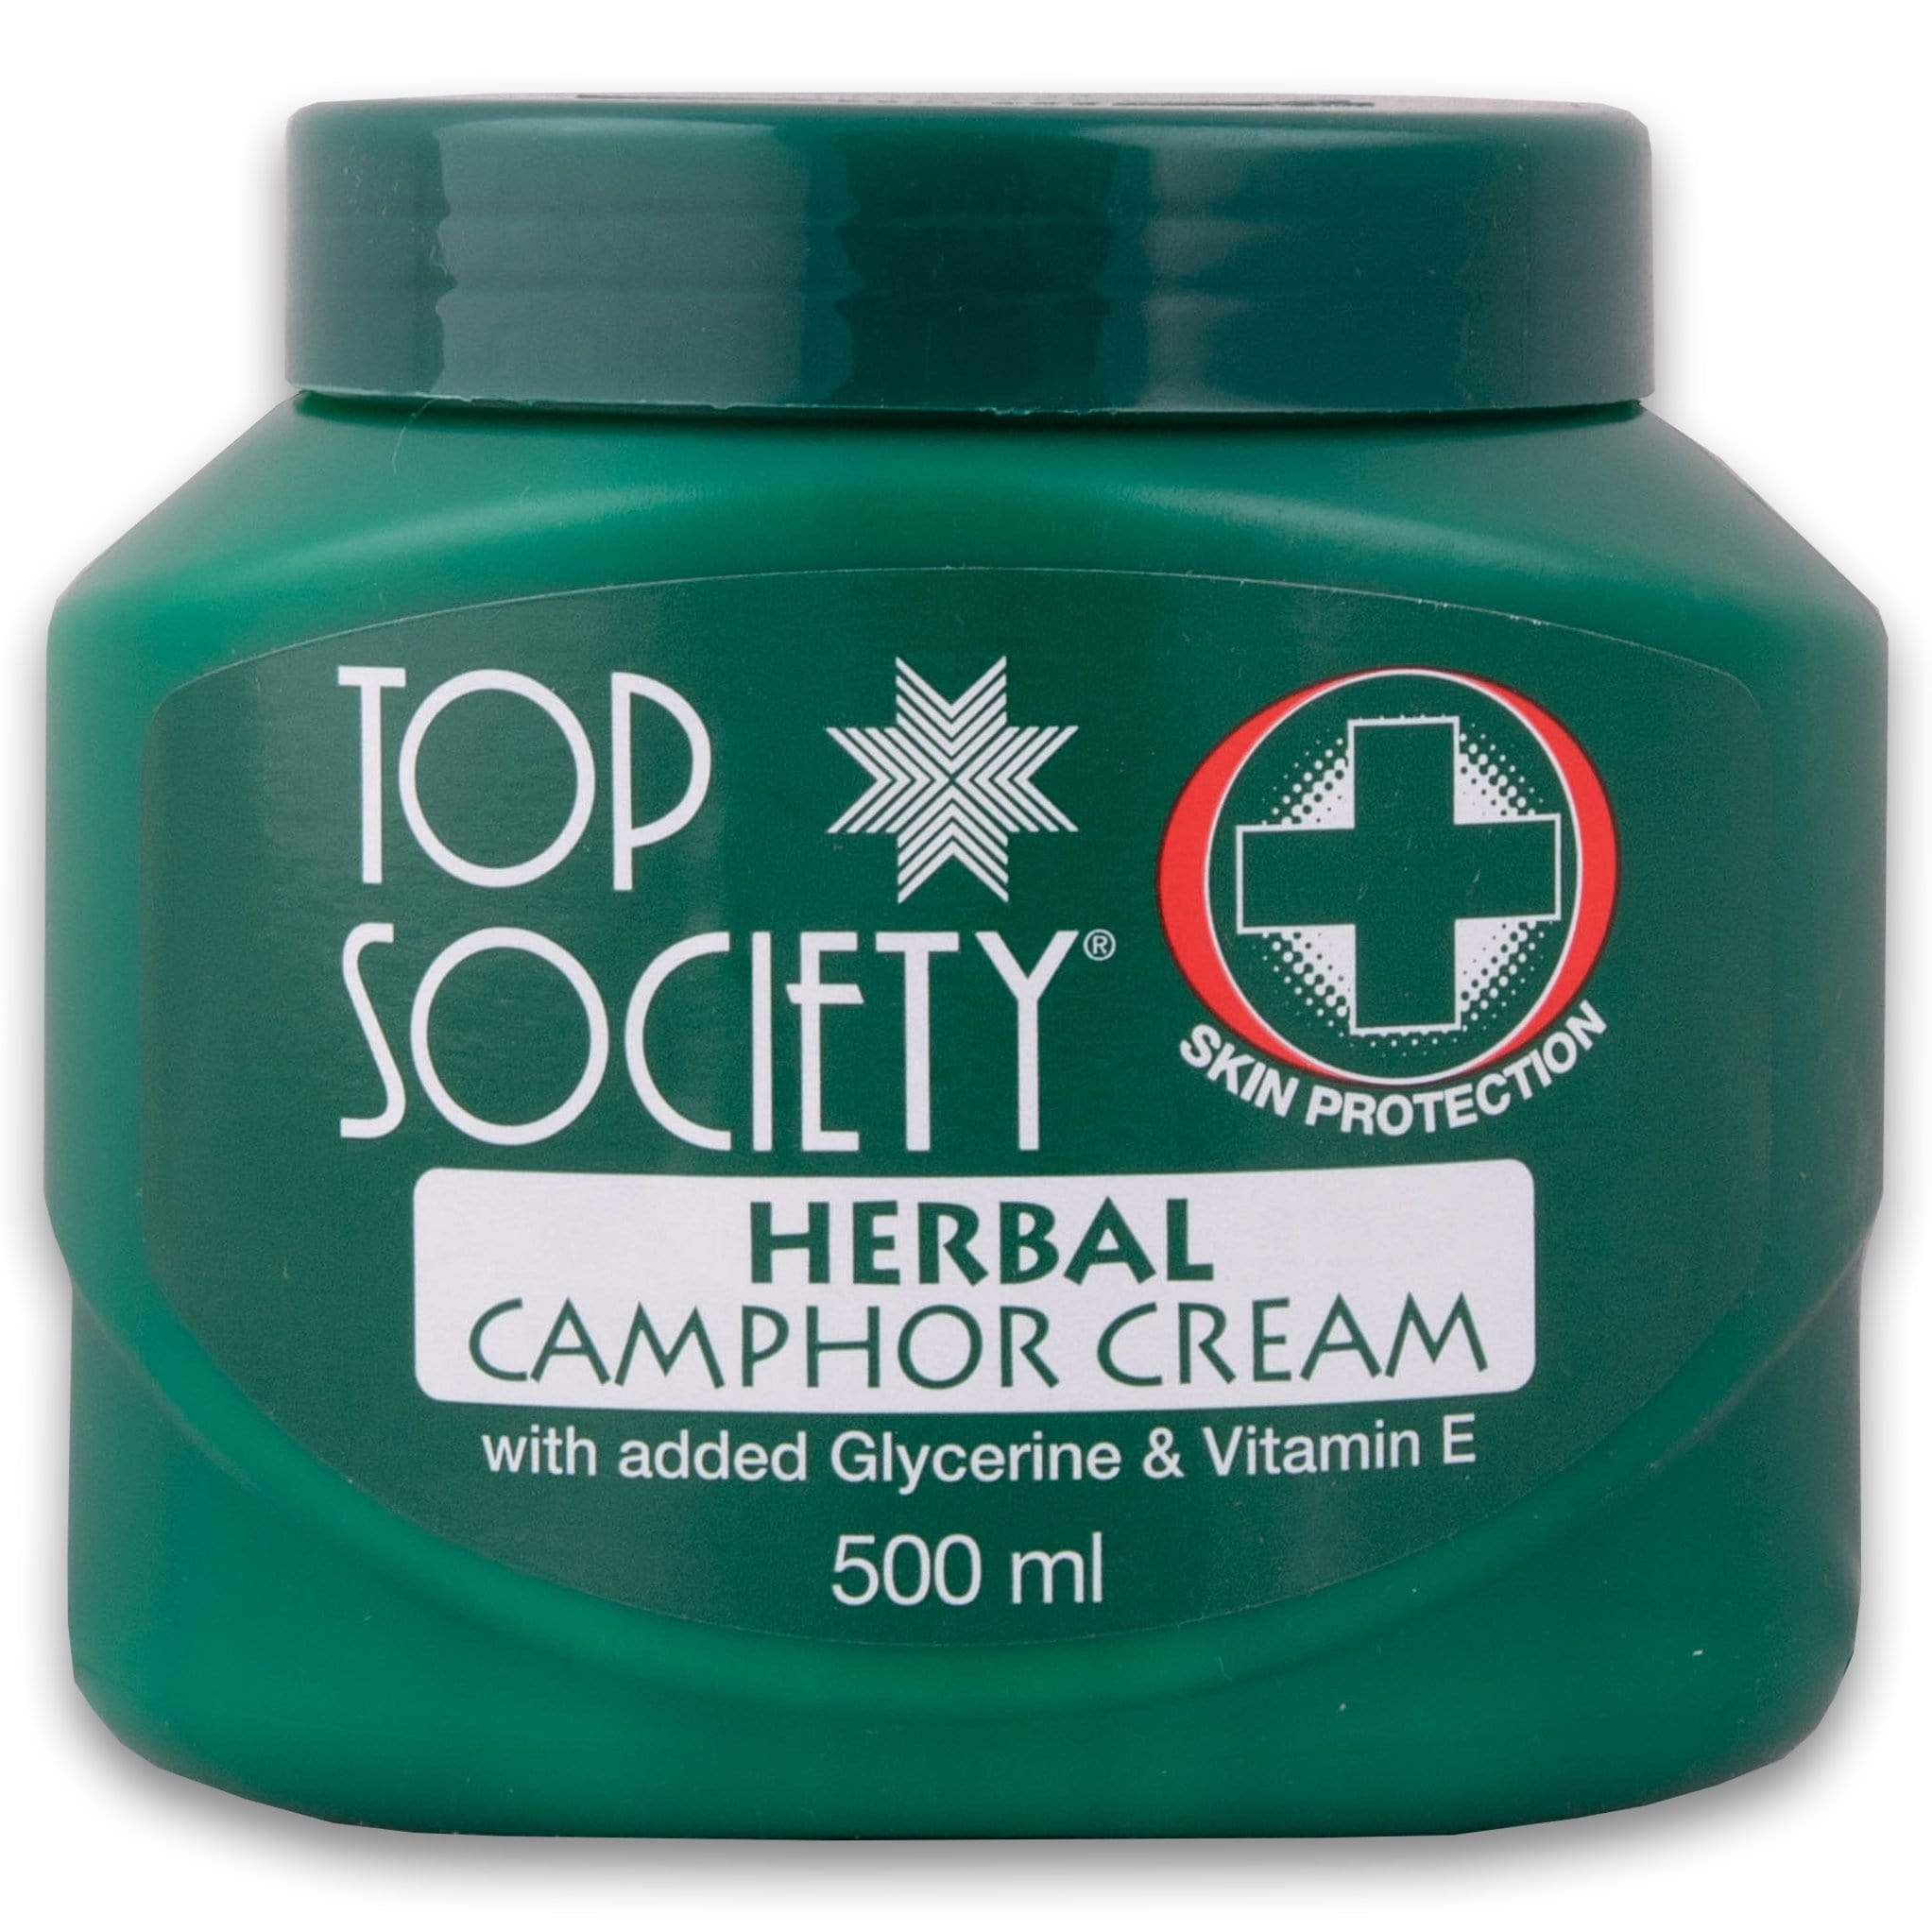 Top Society, Body Cream 500ml - Cosmetic Connection